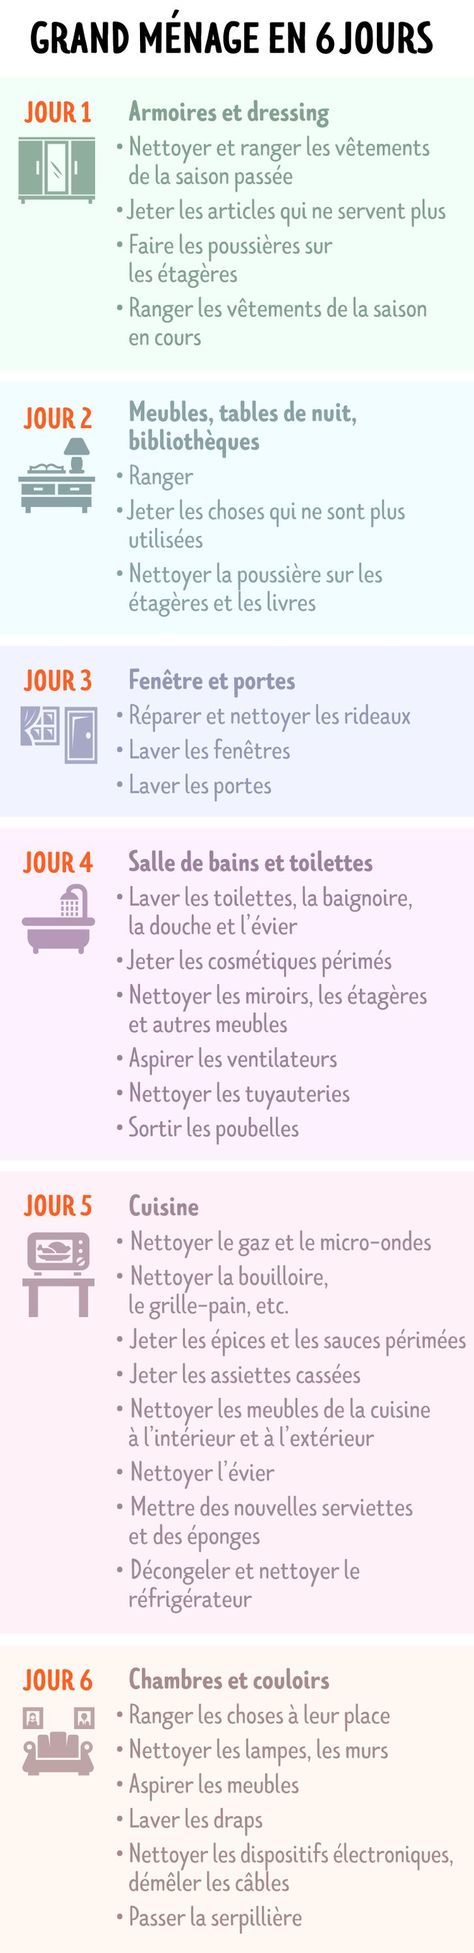 Diy Home Cleaning, Cleaning Hacks, Home Diy, Homework Organization, Home Organisation, Grand Menage, Basic French Words, Good Morning Gorgeous, Home Management